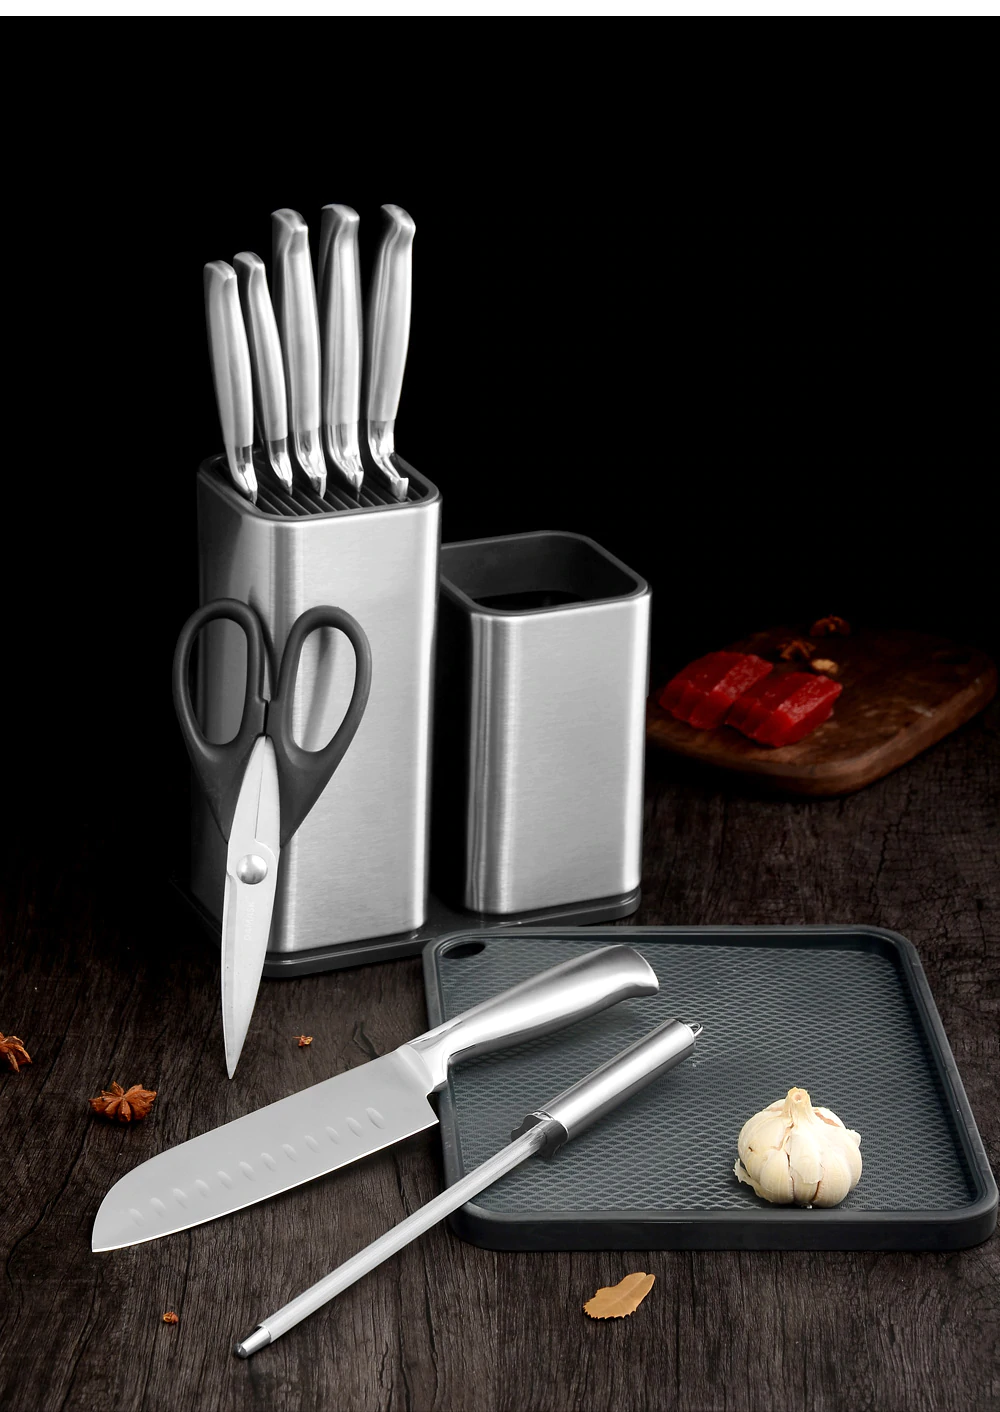 Universal Heavy Duty Professional Kitchen Knife Set Holder Box | Knives Storage Tool | Knife Organizer Bucket Case | Cutlery Knives Storage Utensils Organizer Set | Kitchen Knife Block | Chef Knife Drawers | Universal Knife Block with Slots for Scissors and Sharpening Rod Knife Holder Knives Storage - Knife Protector